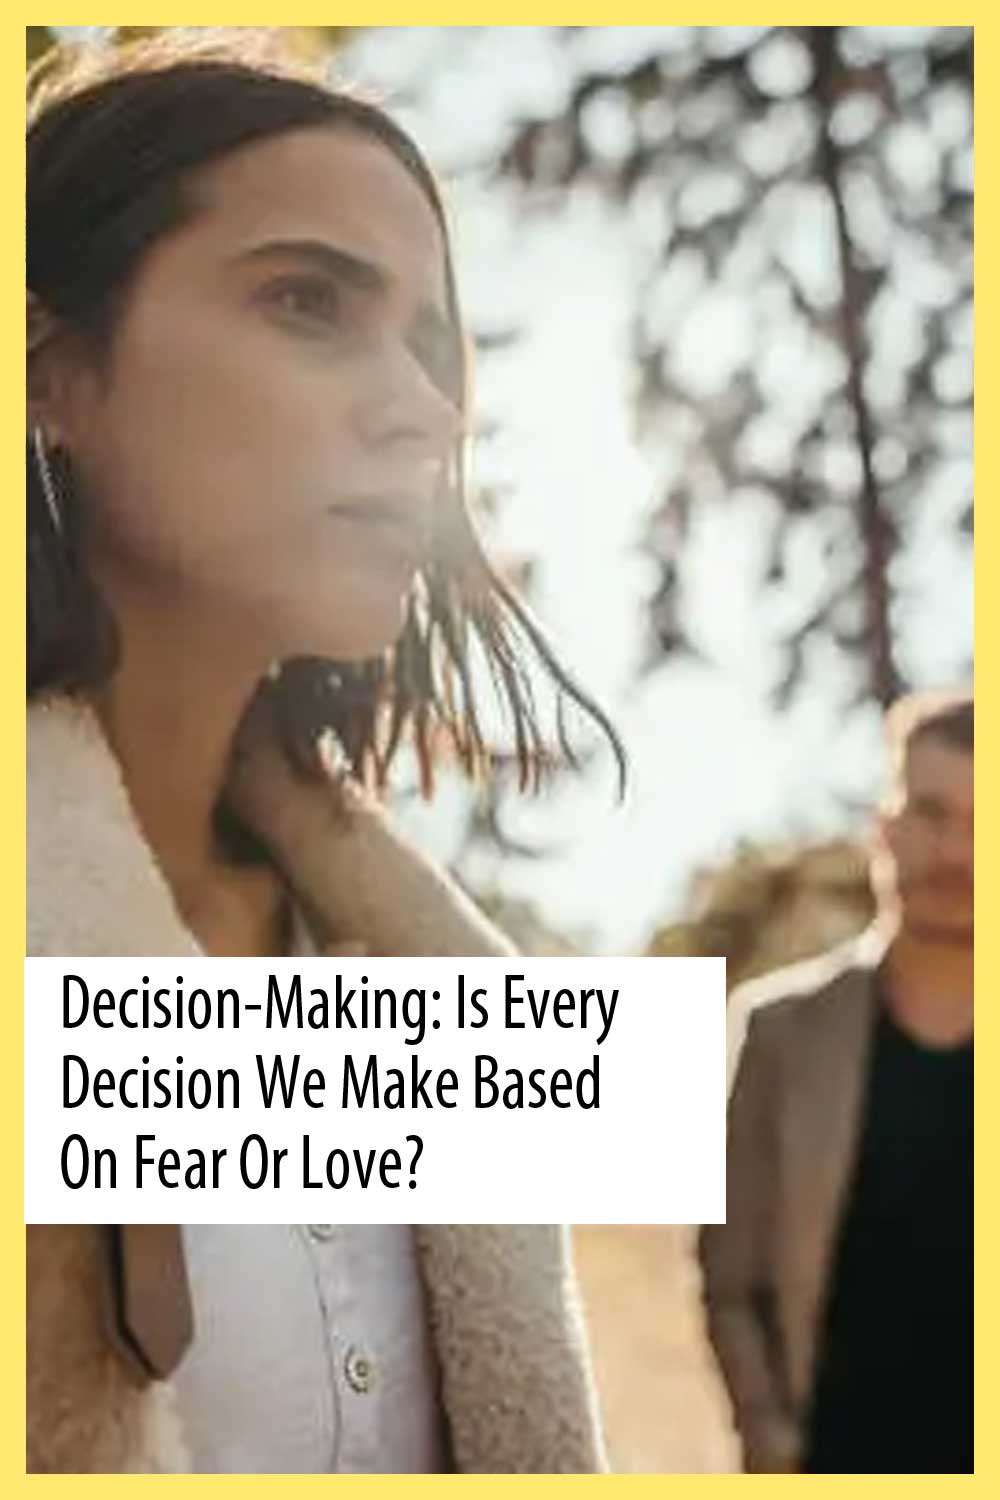 Decision-Making: Is Every Decision We Make Based On Fear Or Love?